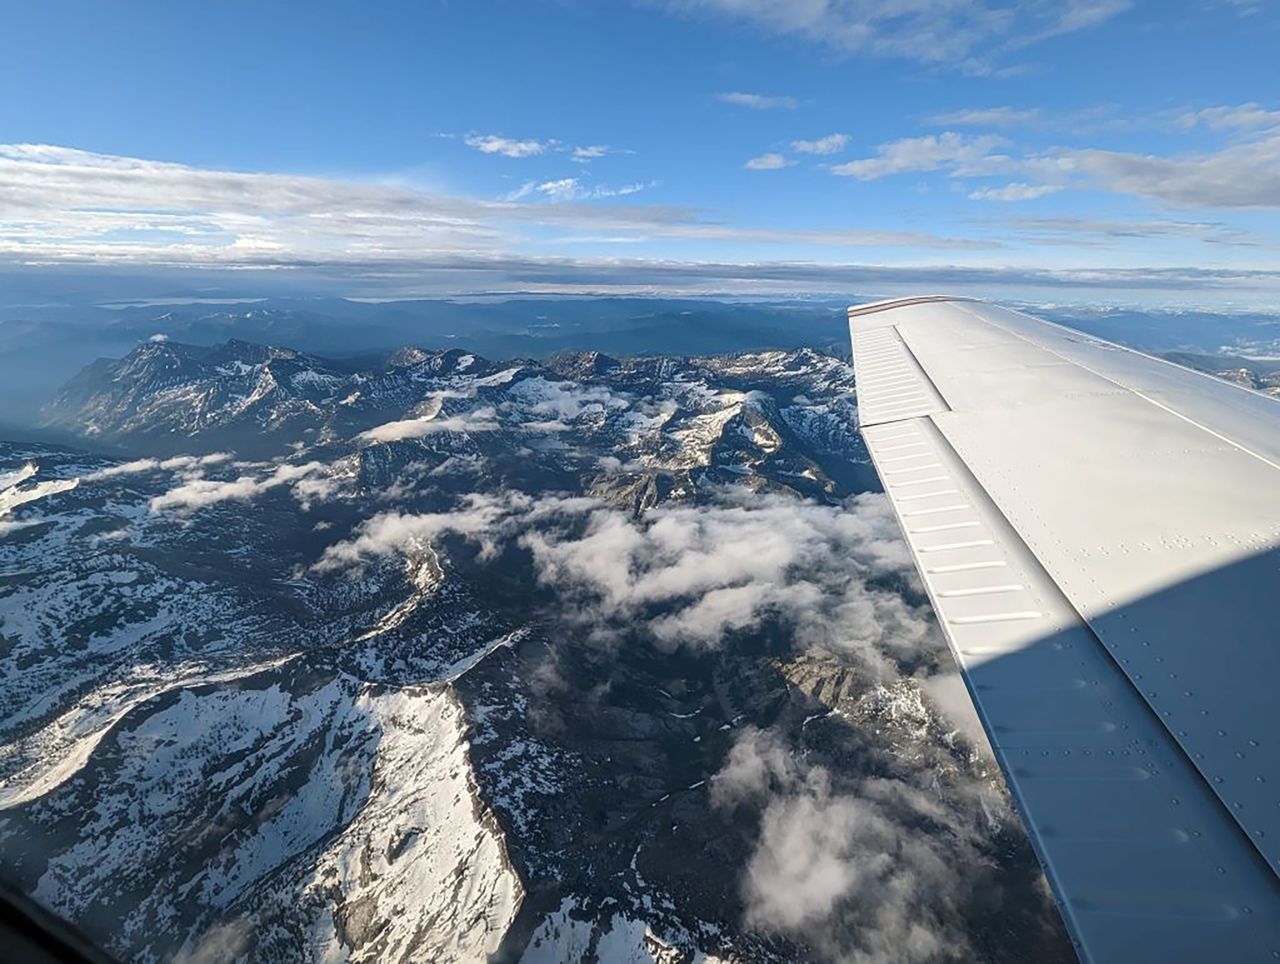 The pilots took in breathtaking views as they flew across the country in less than 48 hours.